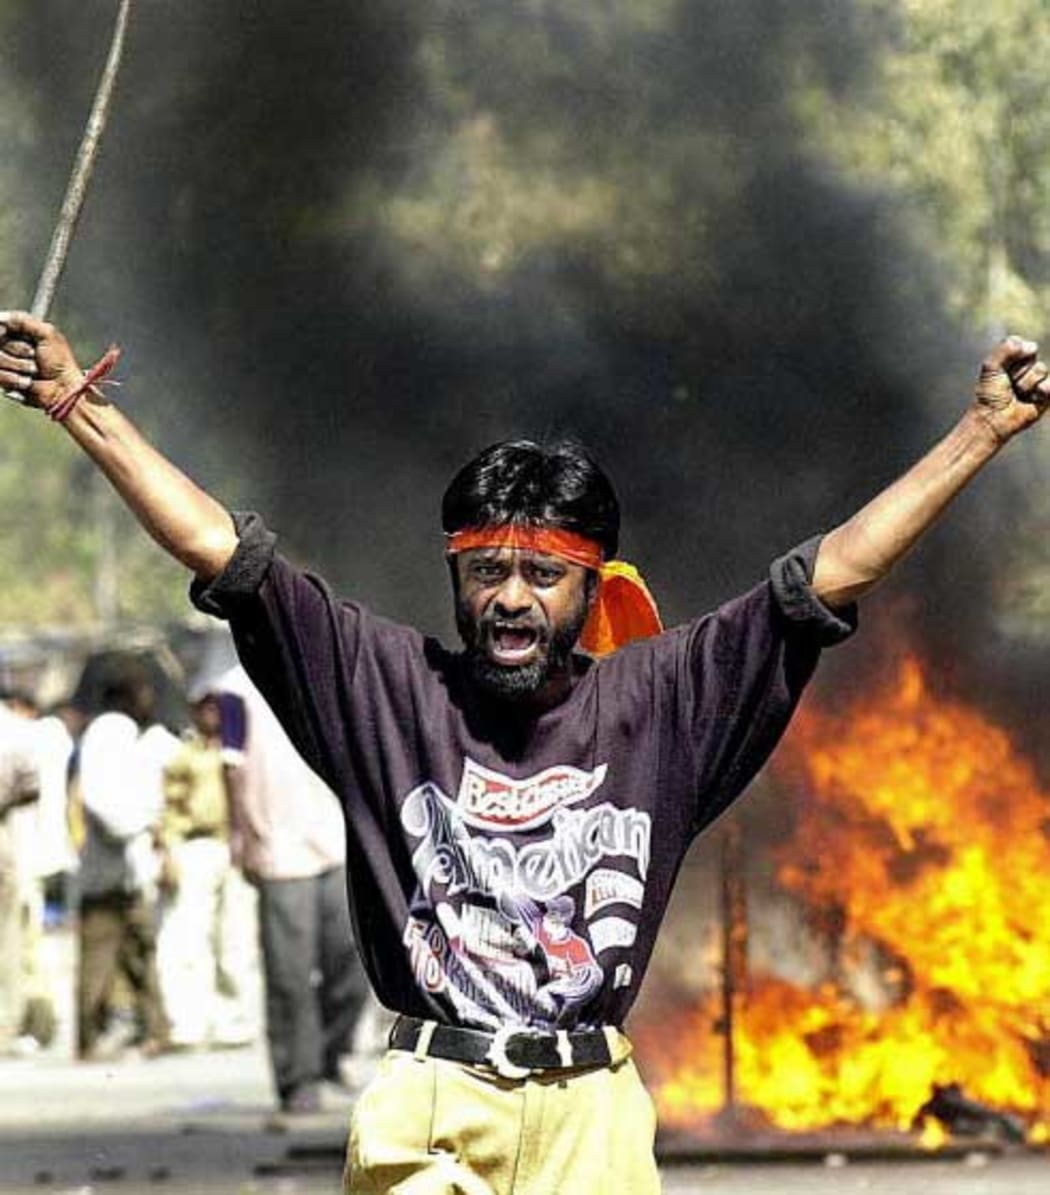 This picture taken 28 February 2002 shows an IndianBajranj Dal activist armed with a iron stick shouting slogans against muslims as they went burning muslim shops and attacked residences at Sahapur in Ahmedabad.